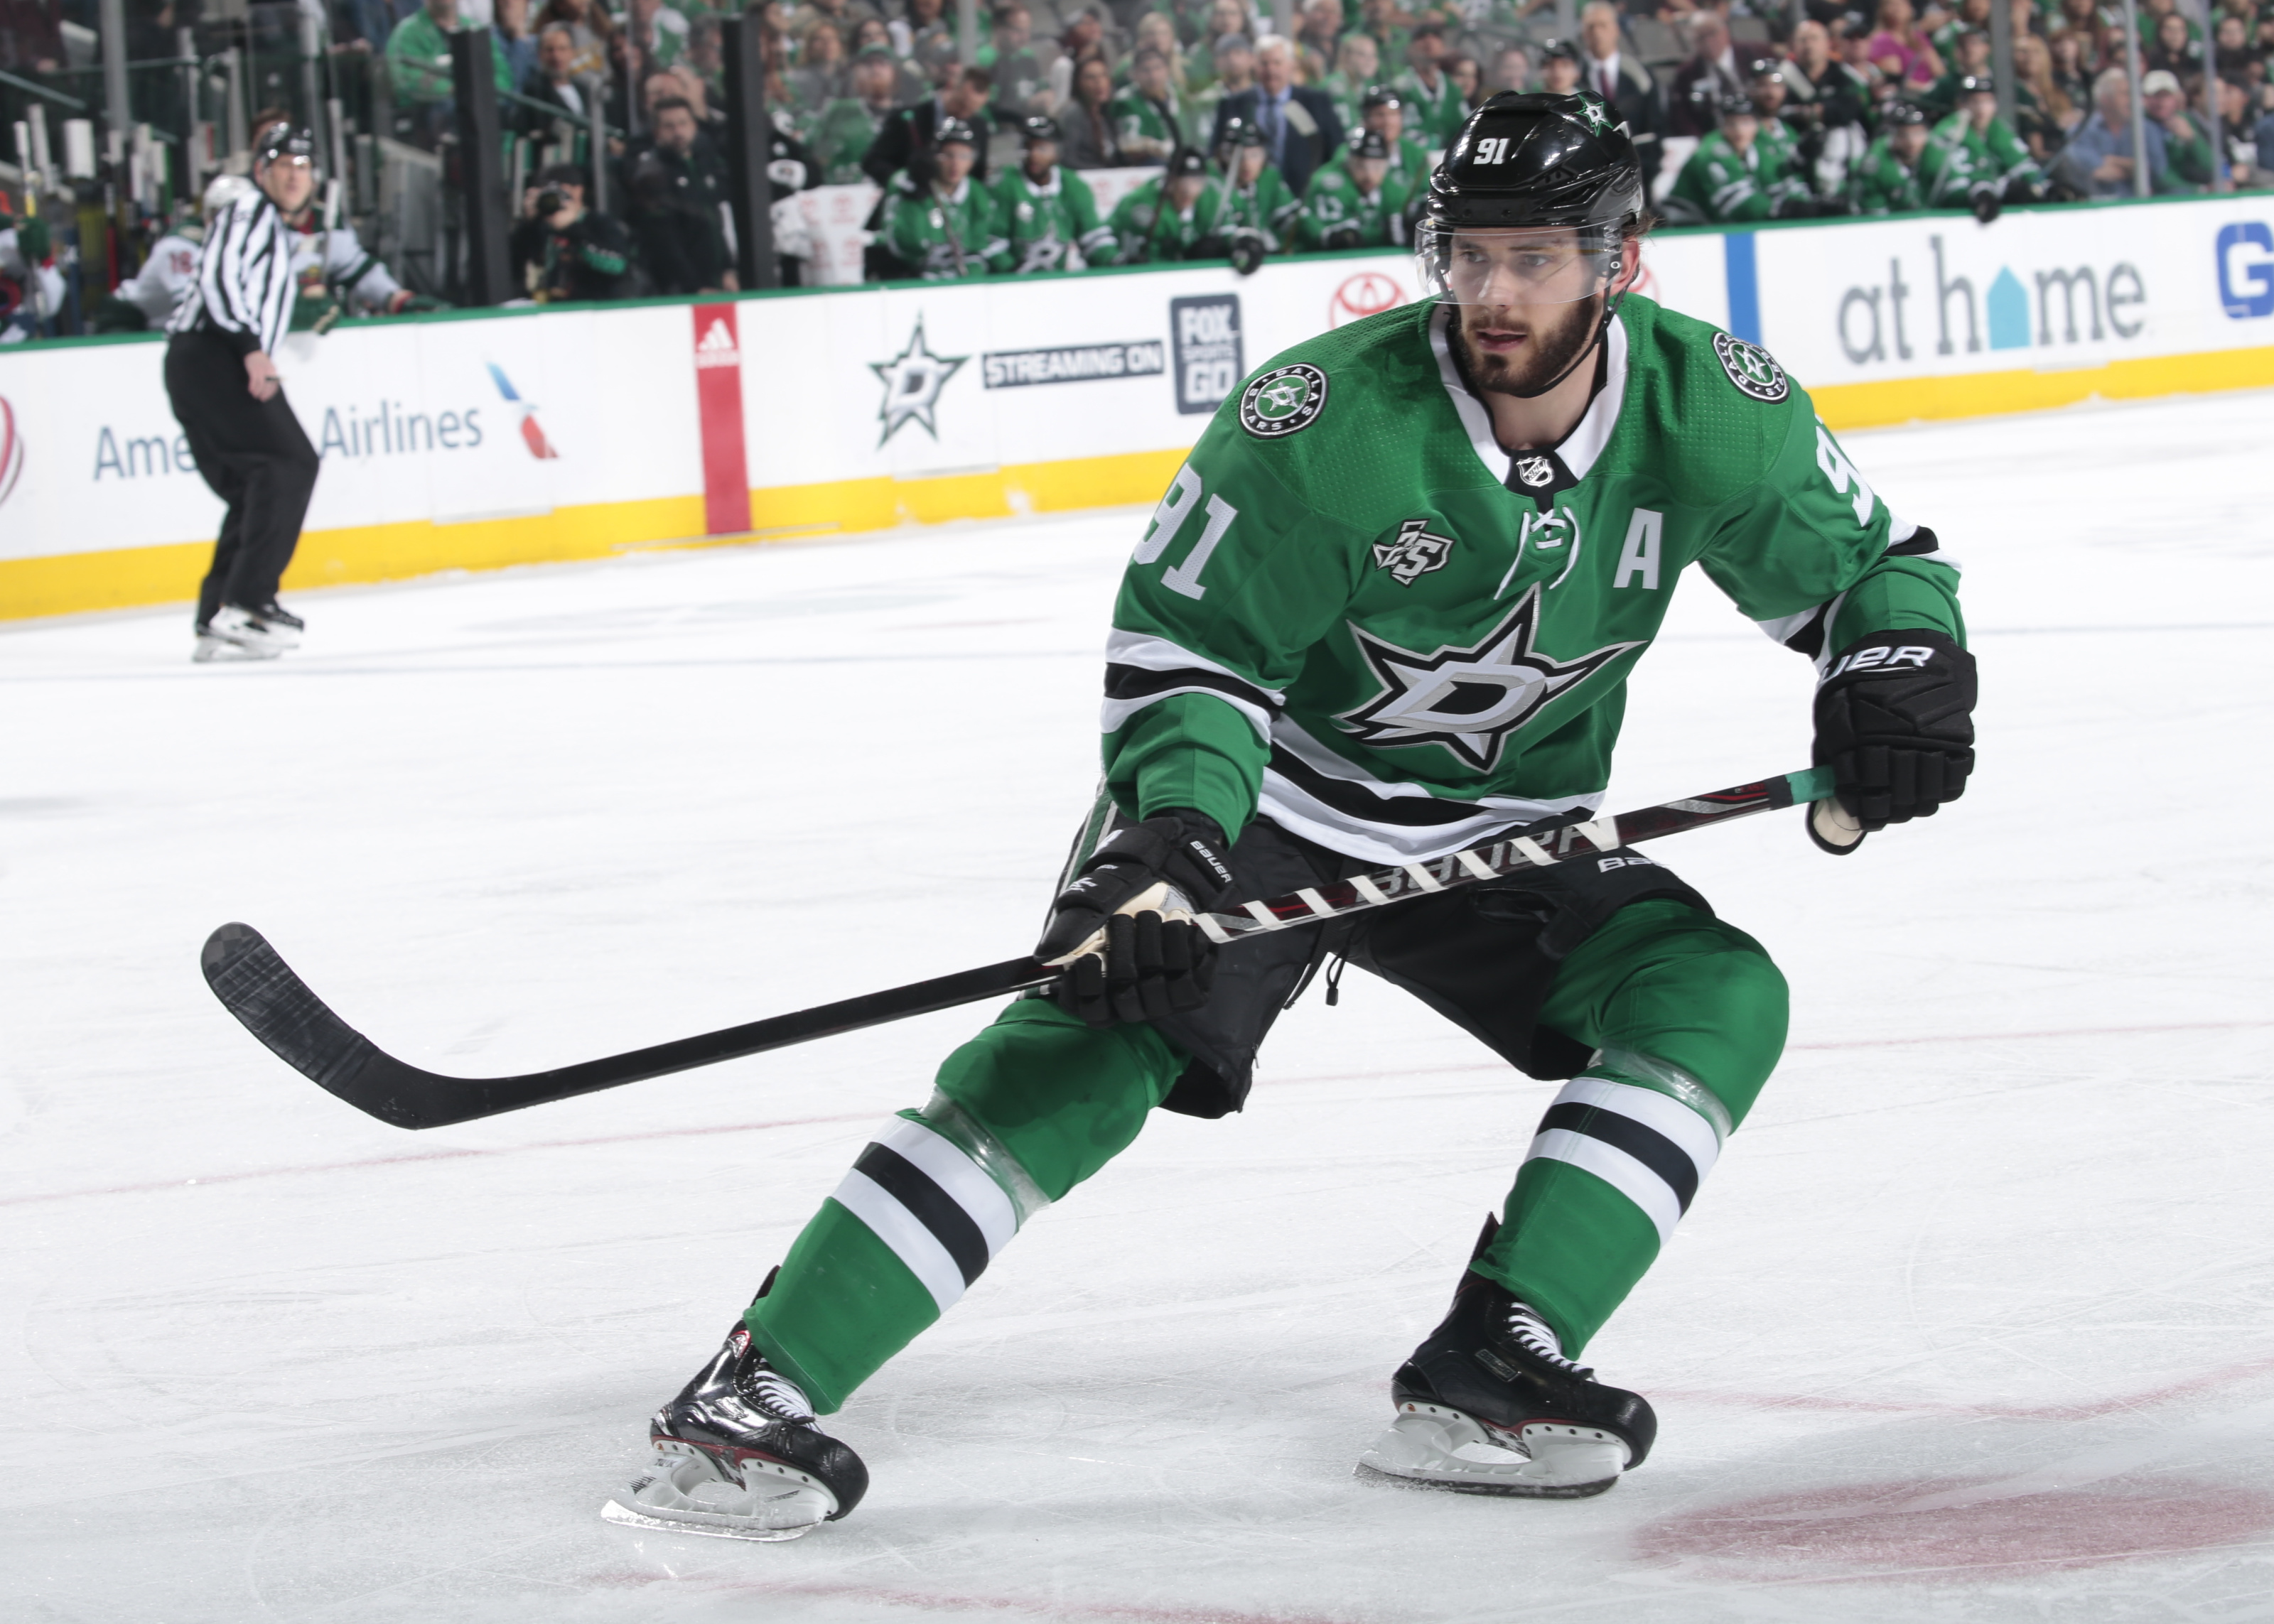 New combination could be key to Tyler Seguin, Stars' second line scoring  consistently